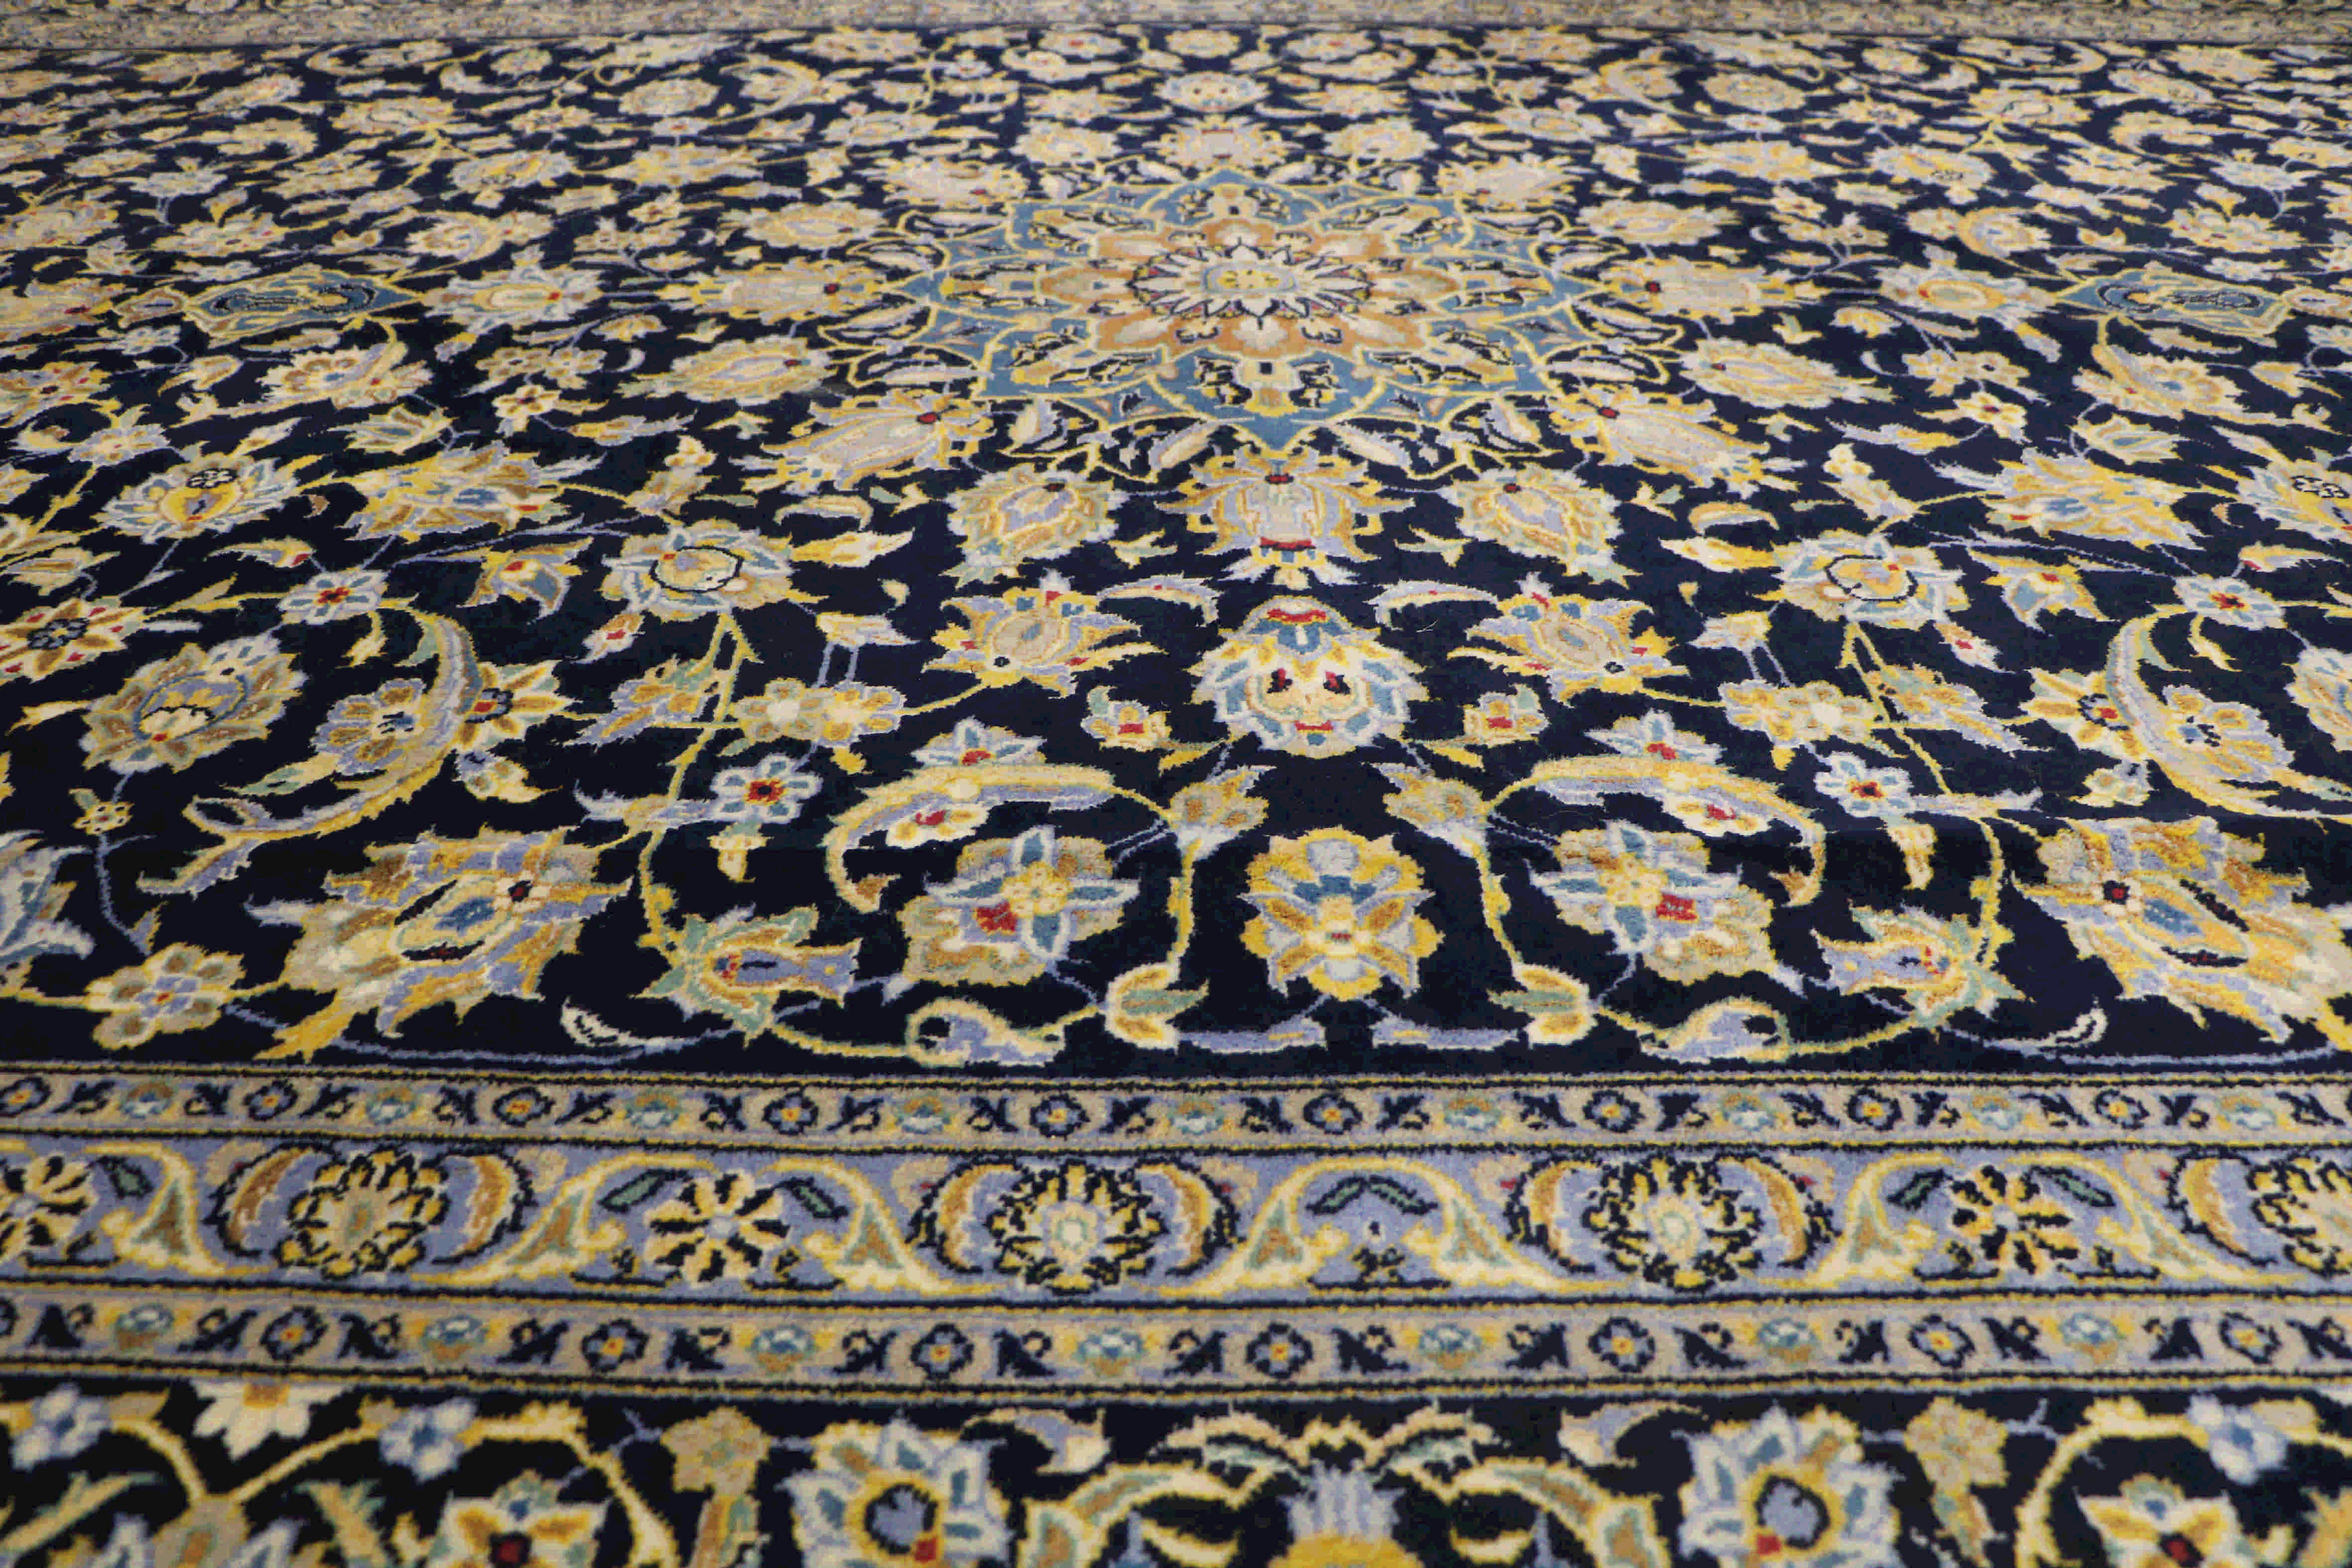 Fine persian kashan rug navy, light blue, and gold